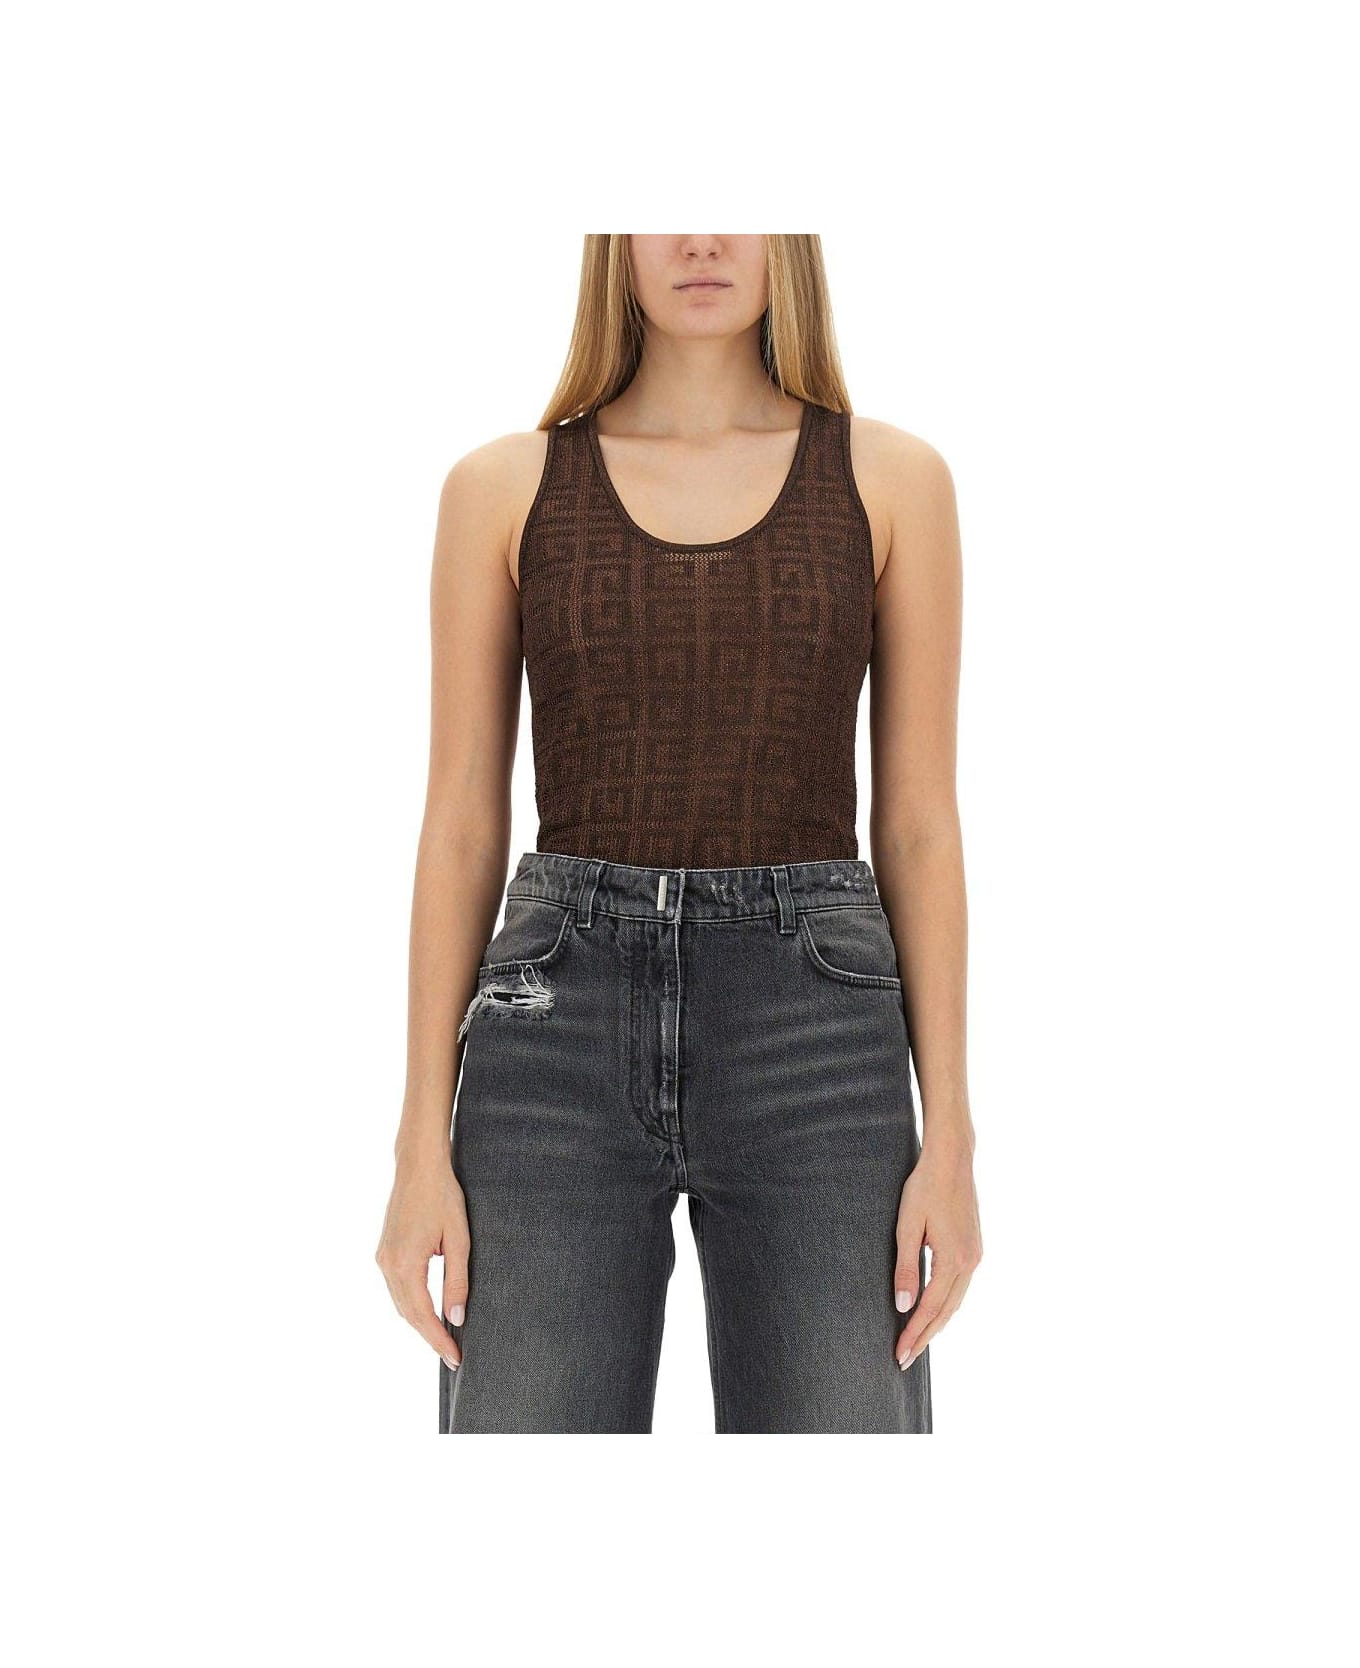 Givenchy Jacquard Knitted Tank Top - BROWN